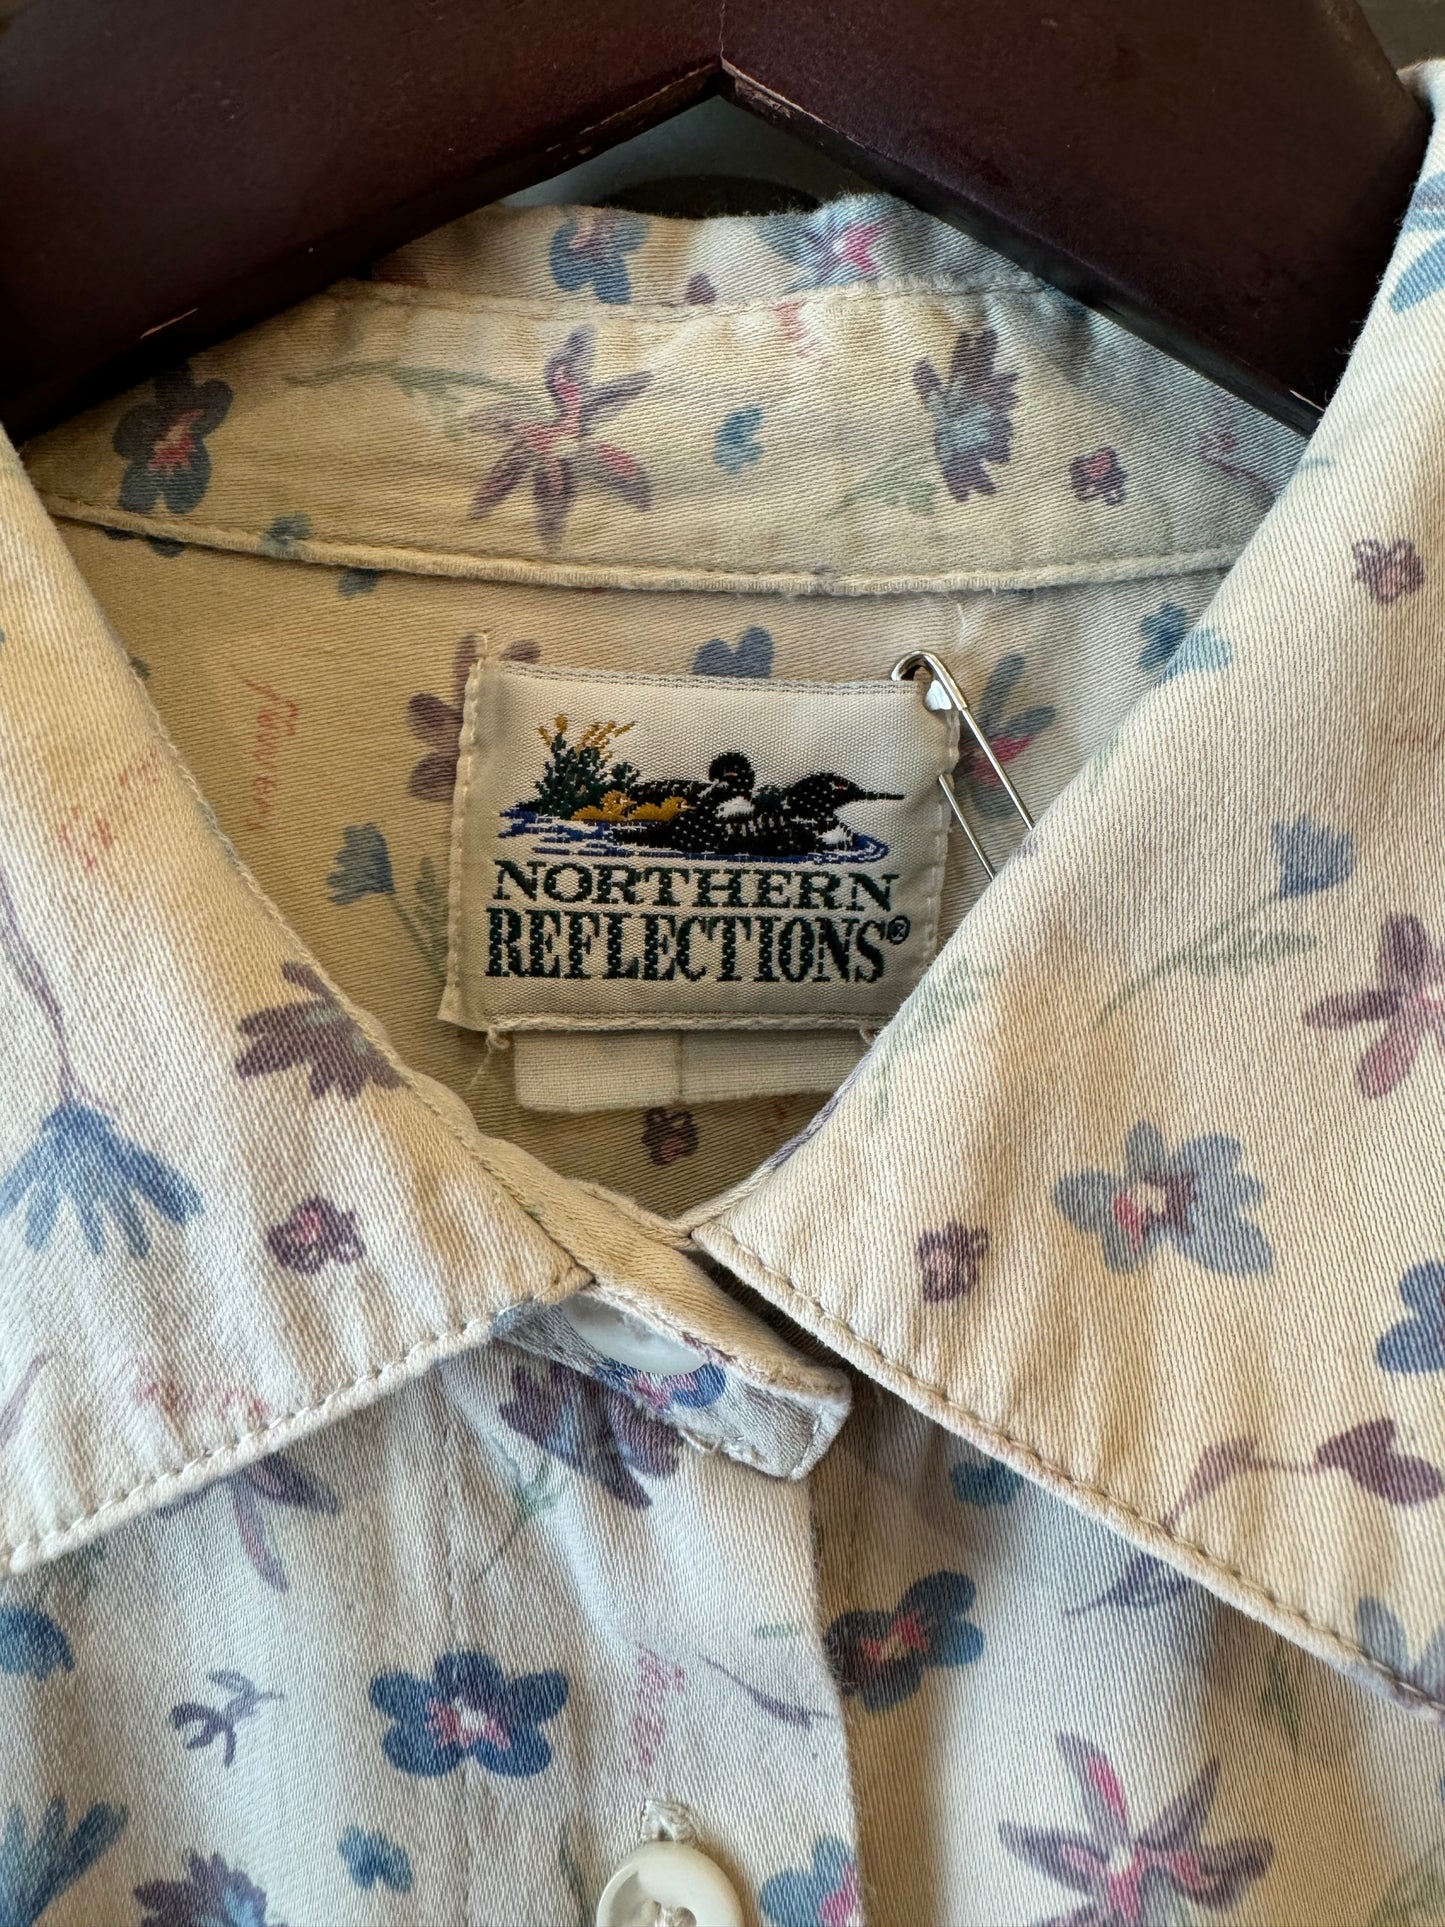 Northern Reflections 1990s Floral Button-Up